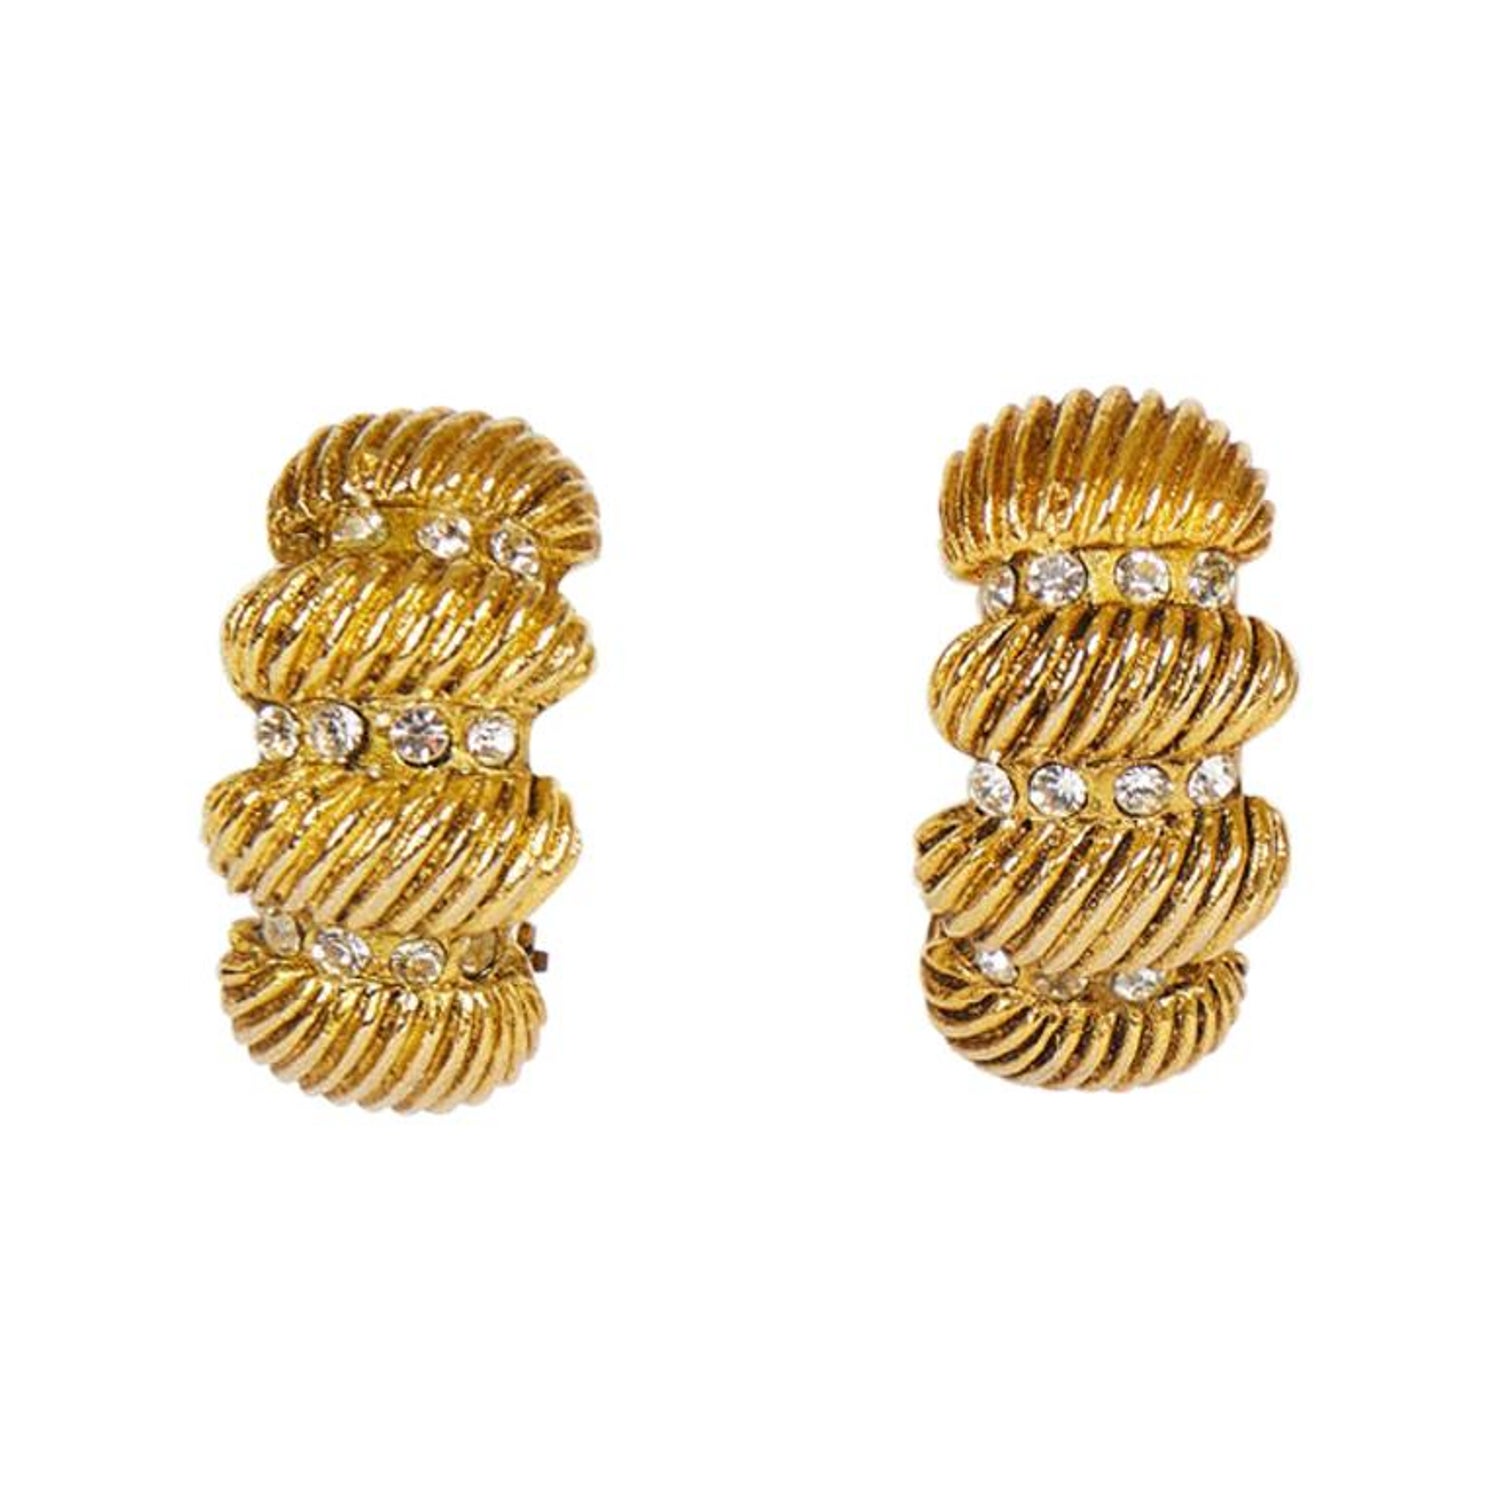 1980's Chanel Vintage Quilted Doorknocker Earrings For Sale at